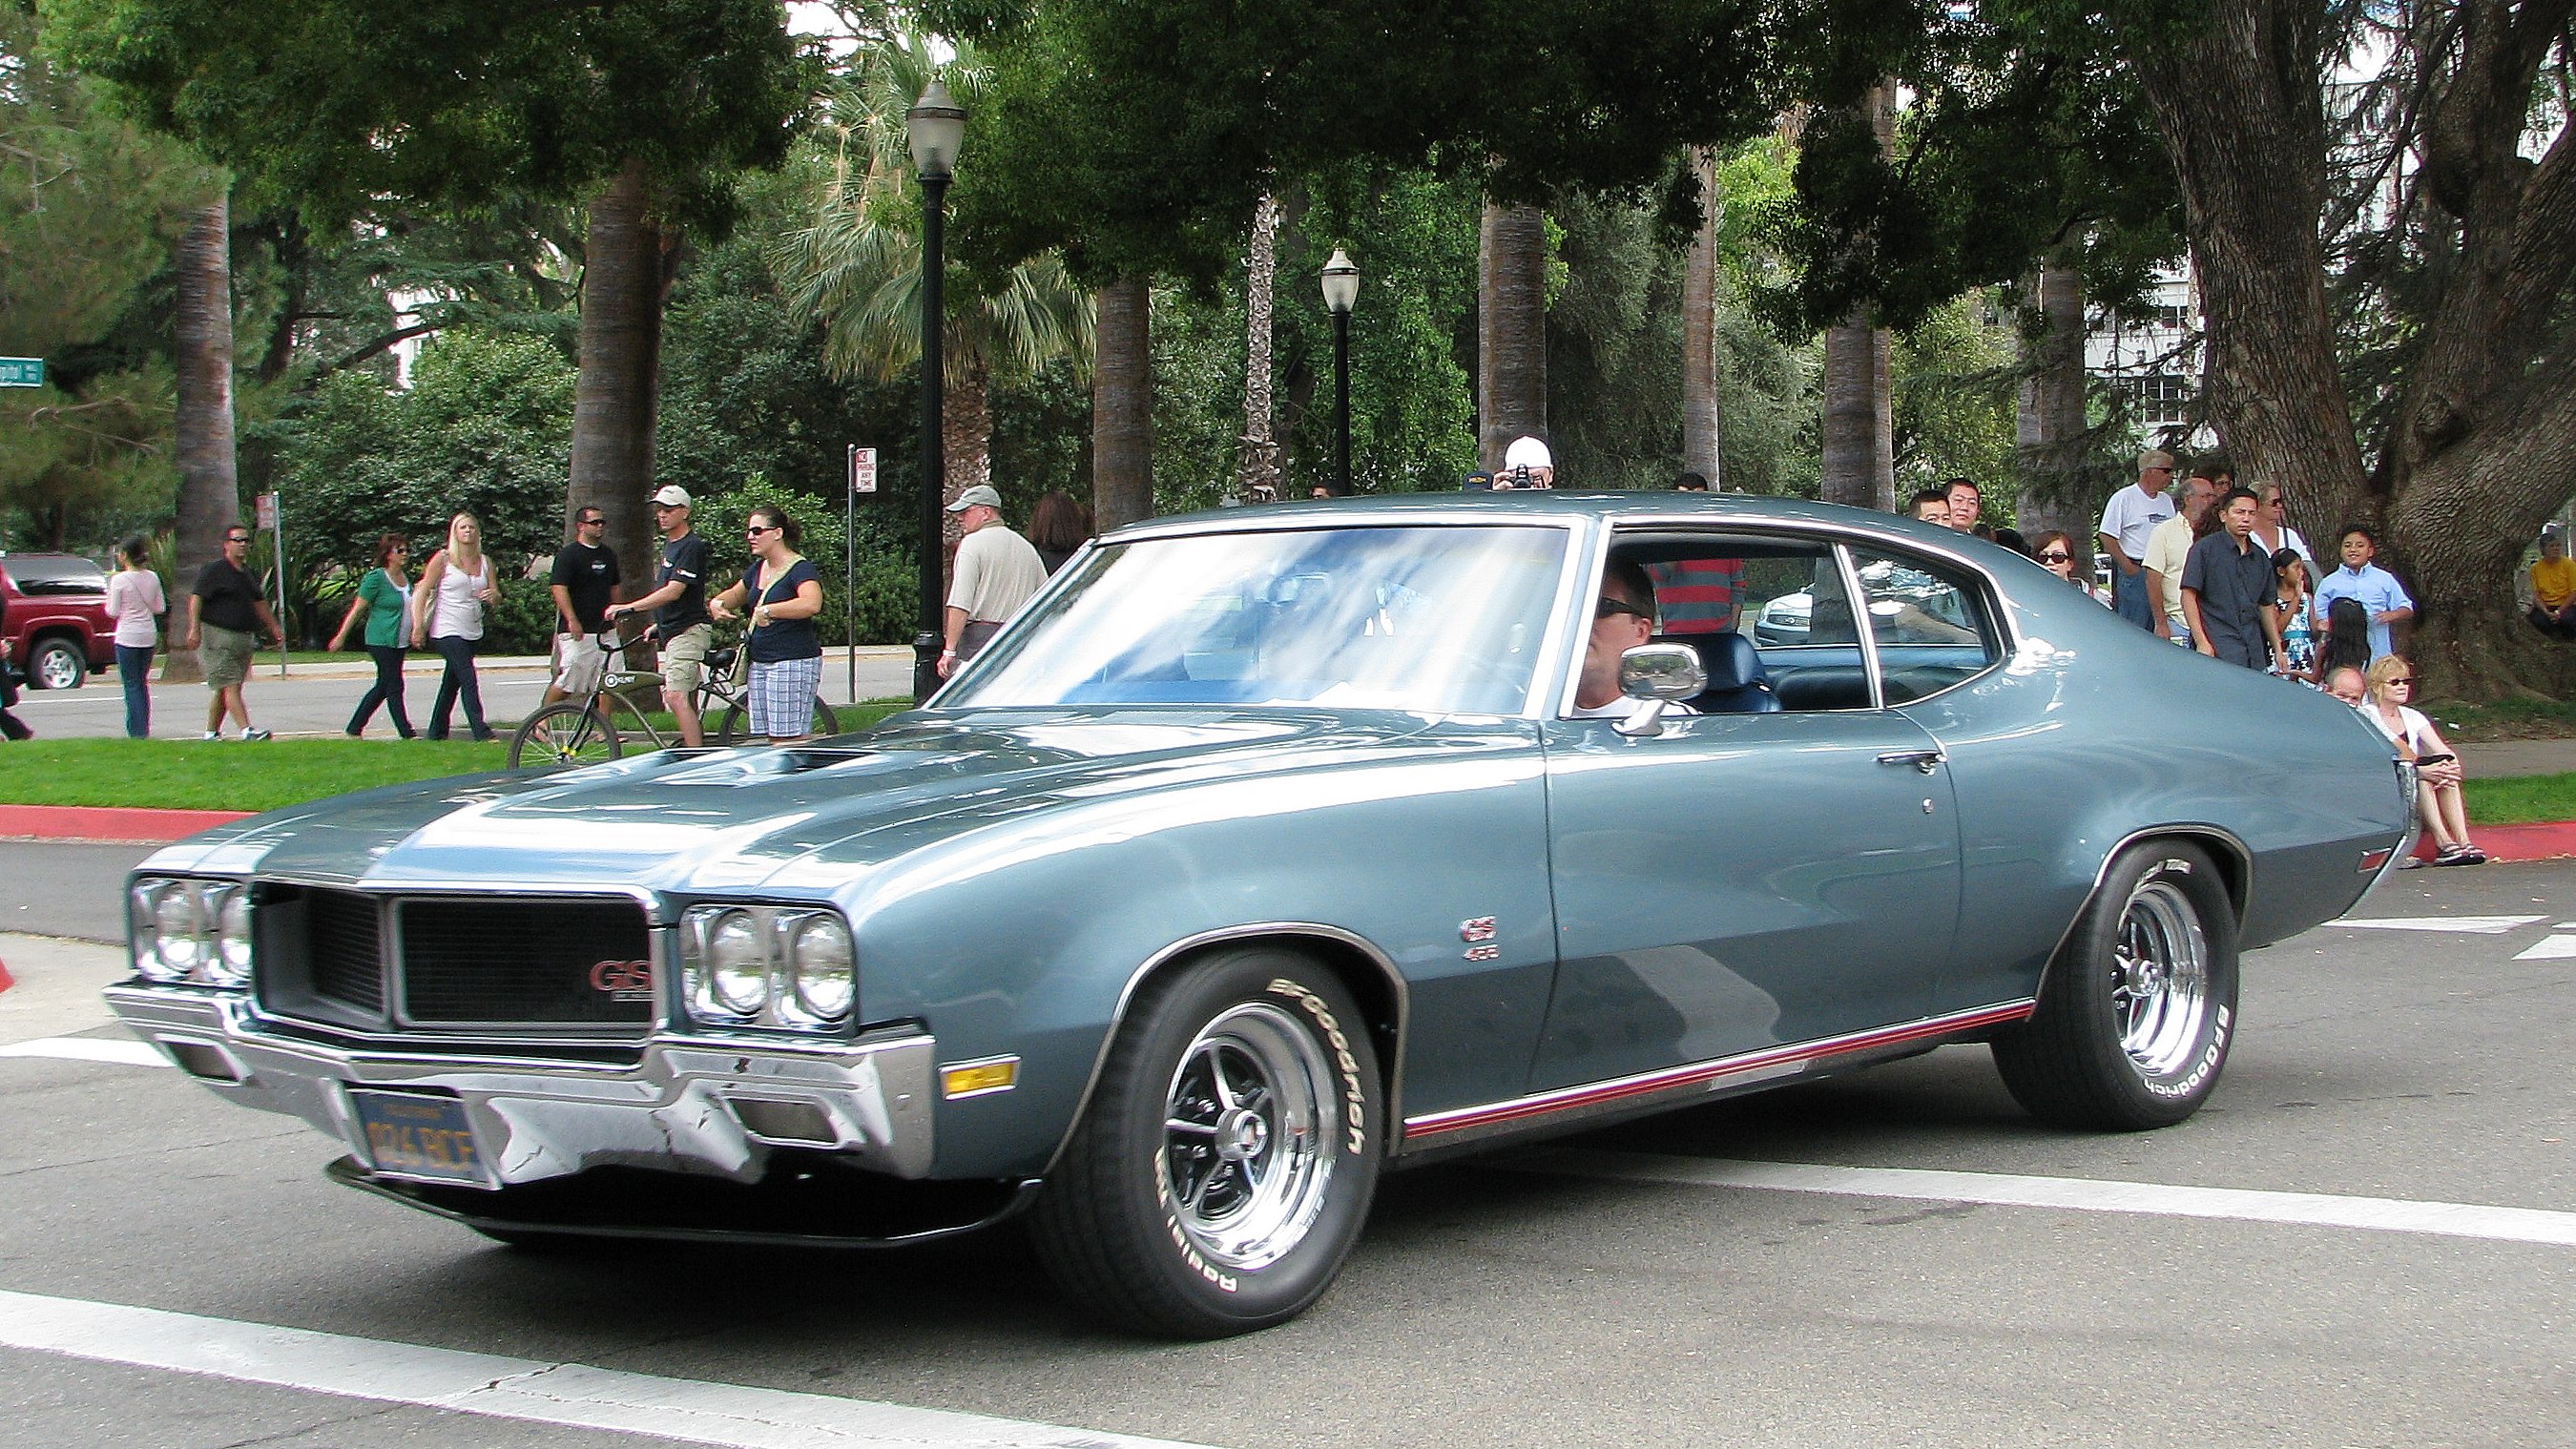 1970 Buick GS 455 '026 BCF' 1 | Flickr - Photo Sharing!